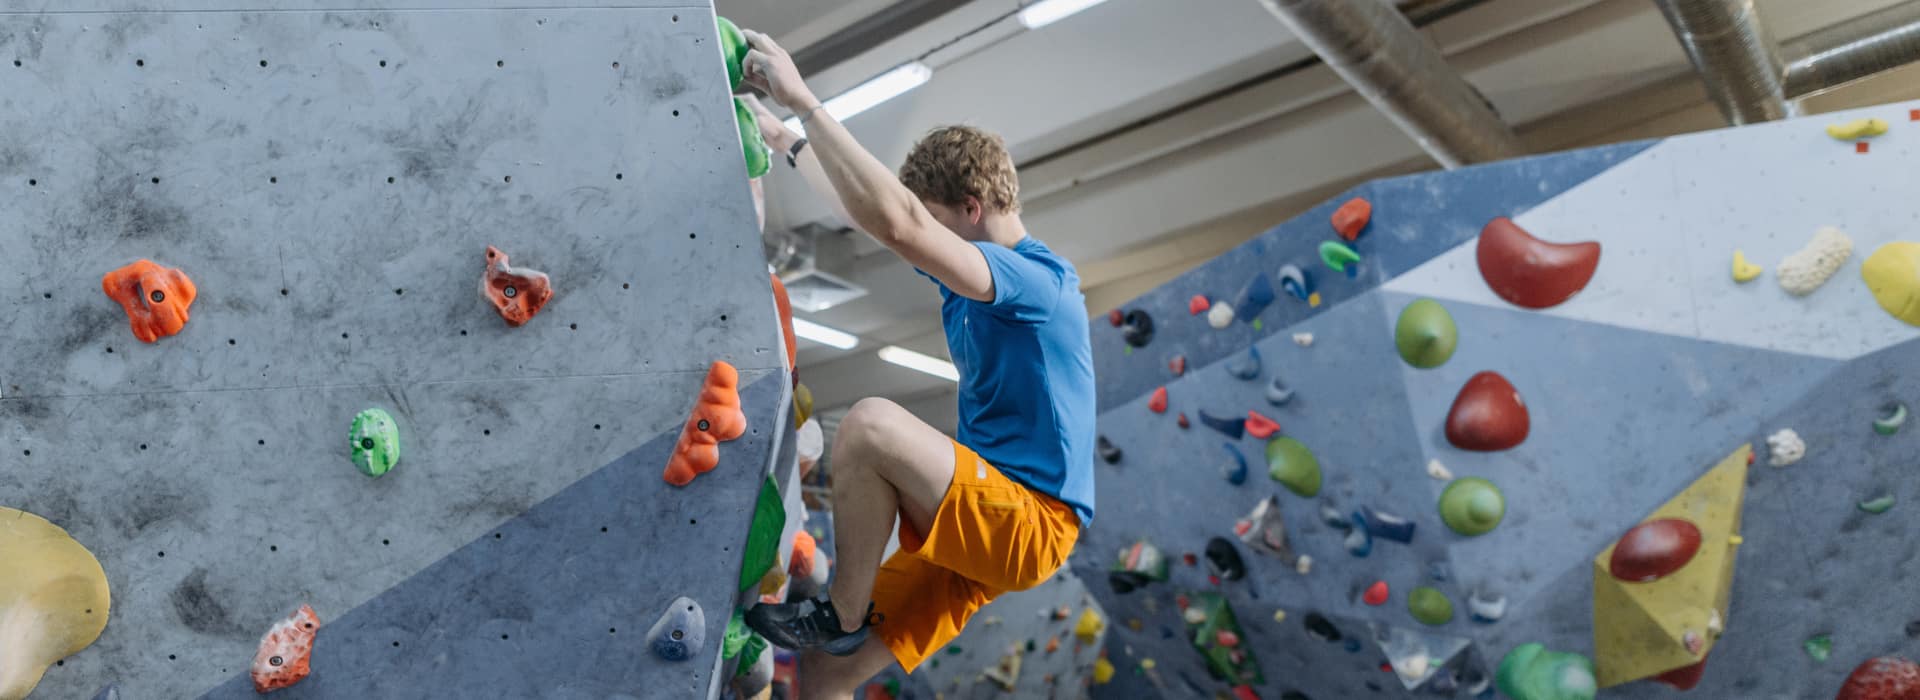 Person climbing on indoor rock wall